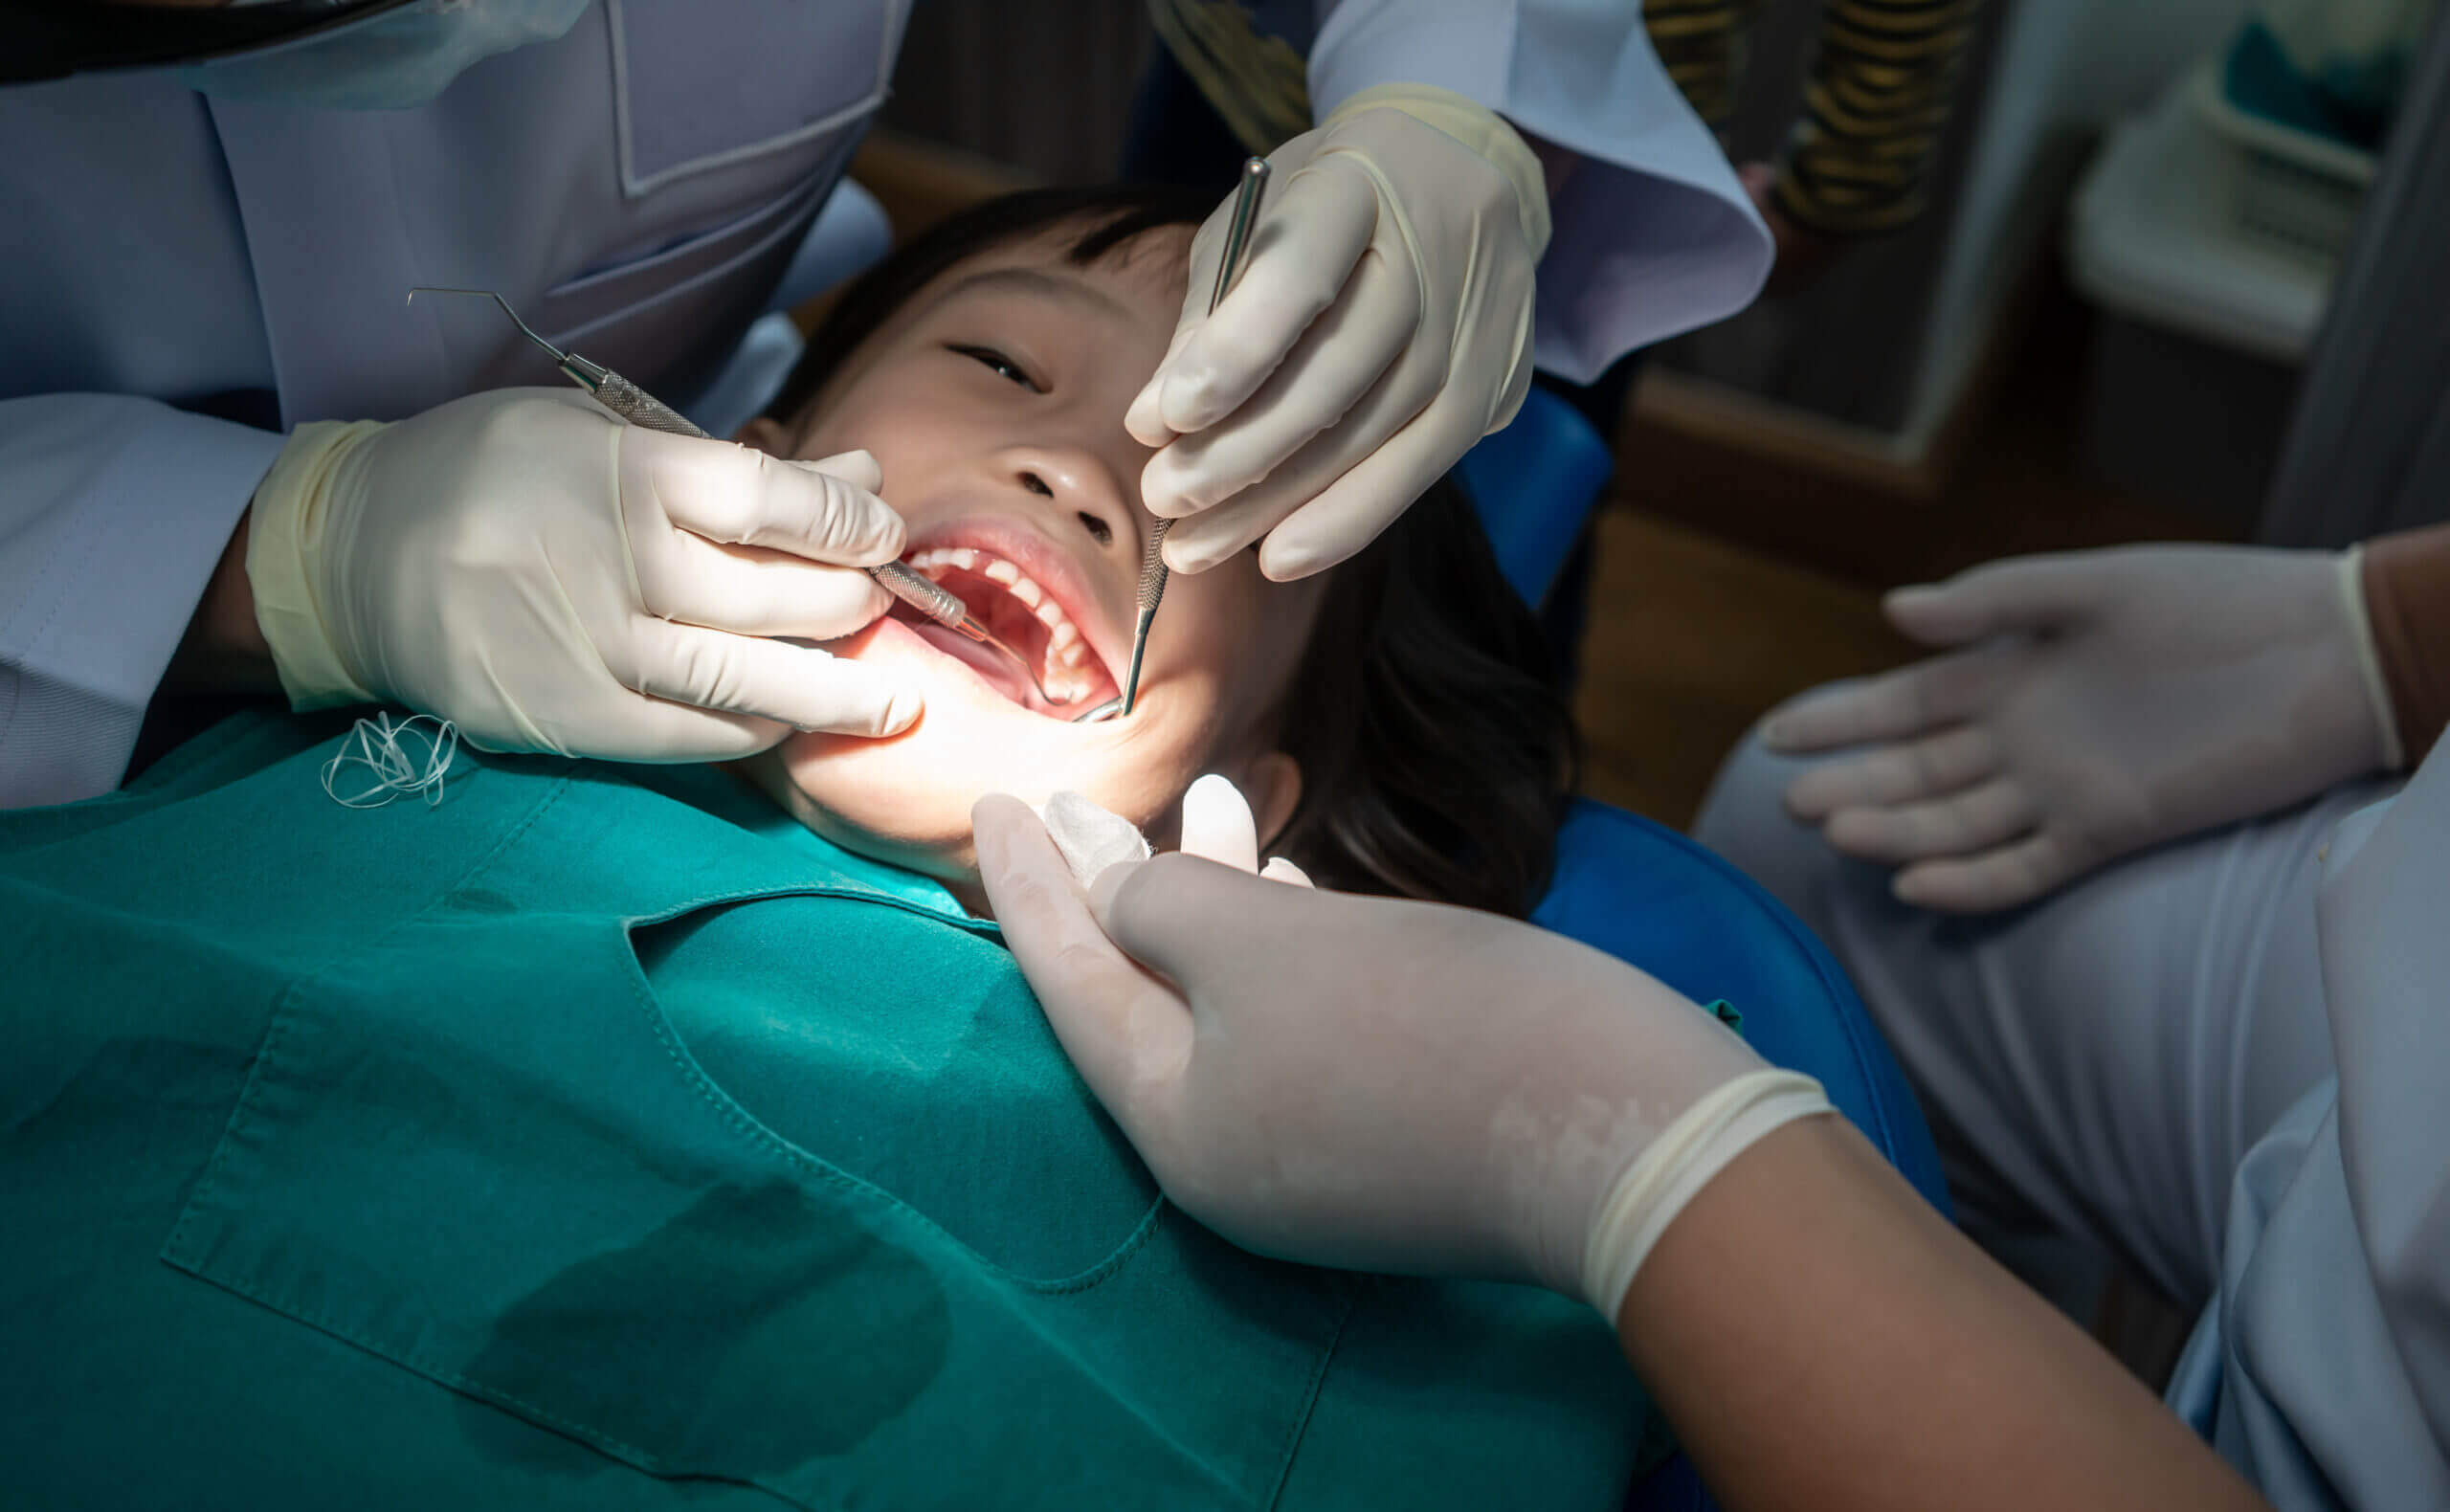 dental sealants Asian girl met the dentist for routine dental checkup and consultant. Dental cleaning process.